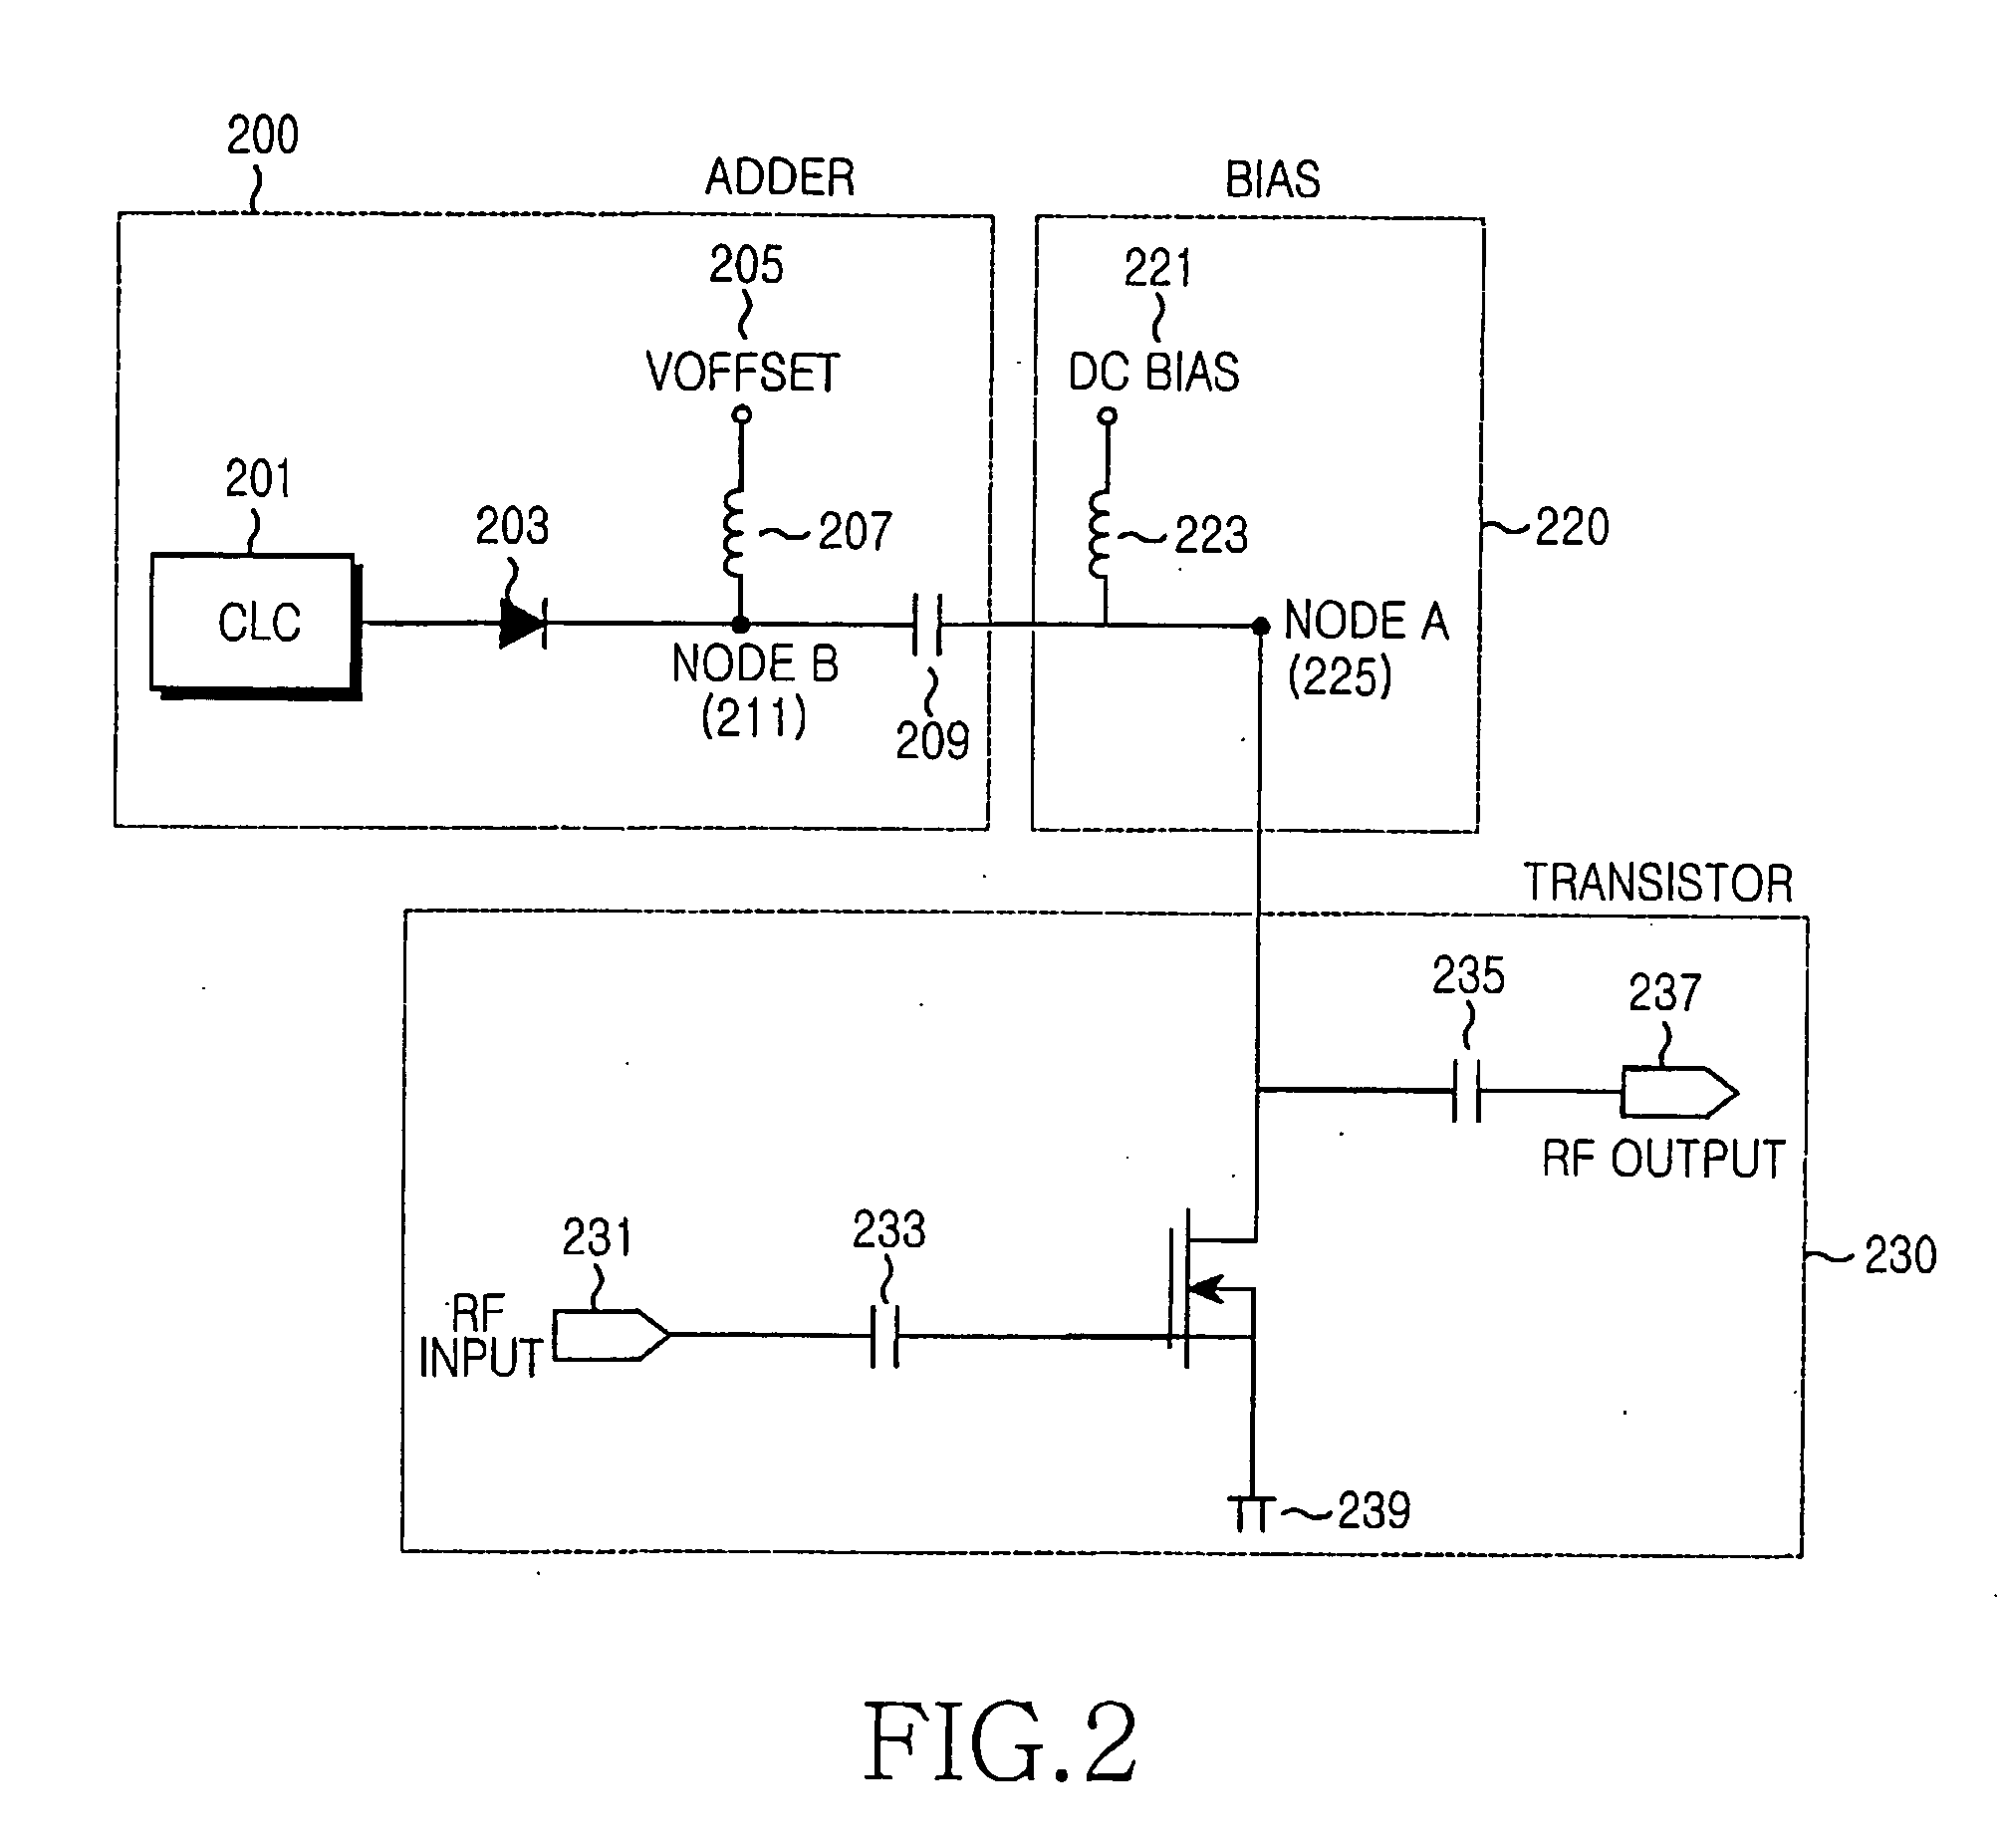 Apparatus and method for reducing drain modulation of high power transistor